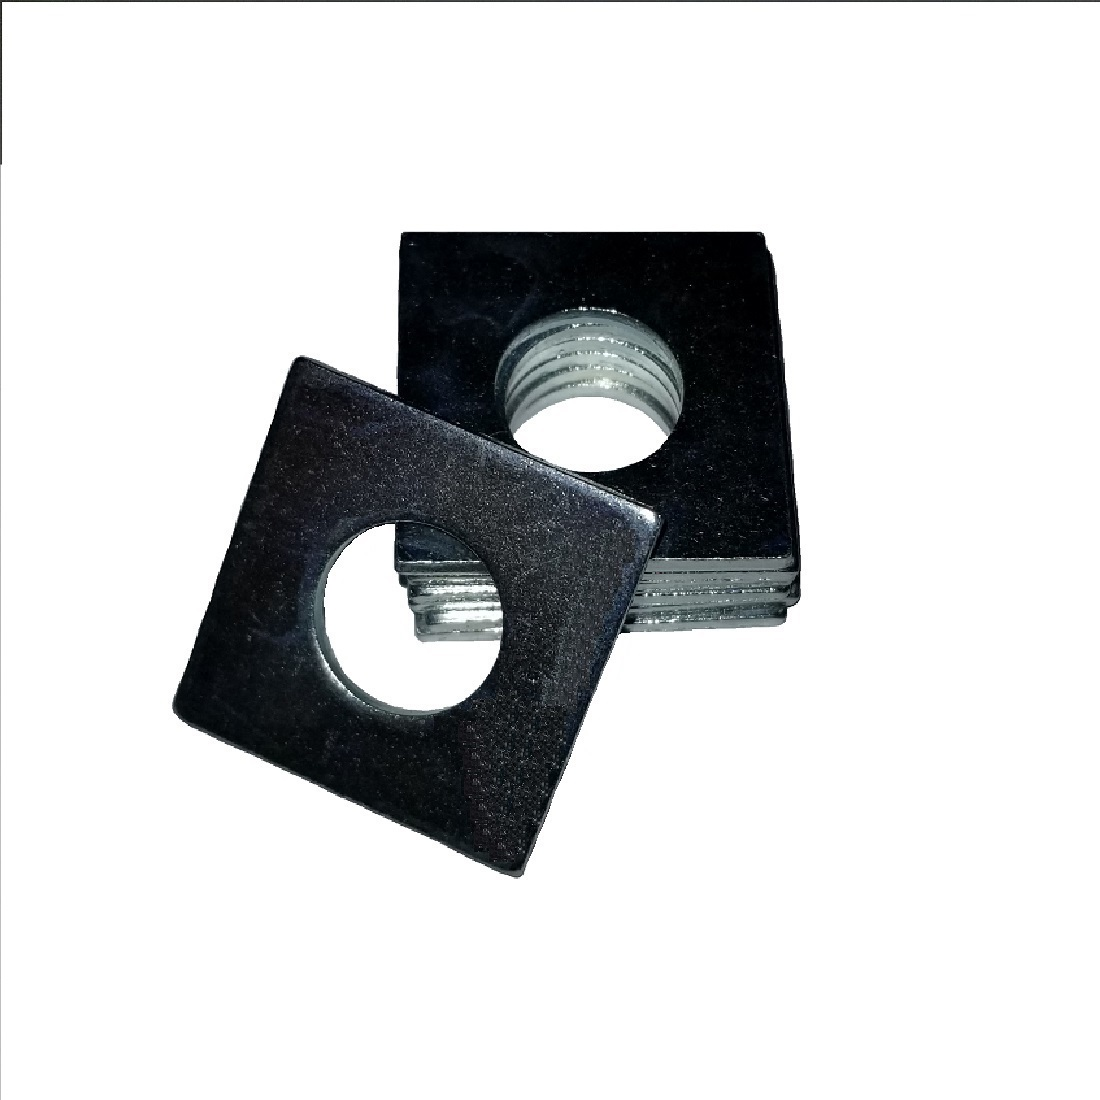 Square OD Washer - 1.625 ID, 2.000 OD, 0.125 Thick, Spring Steel - Hard